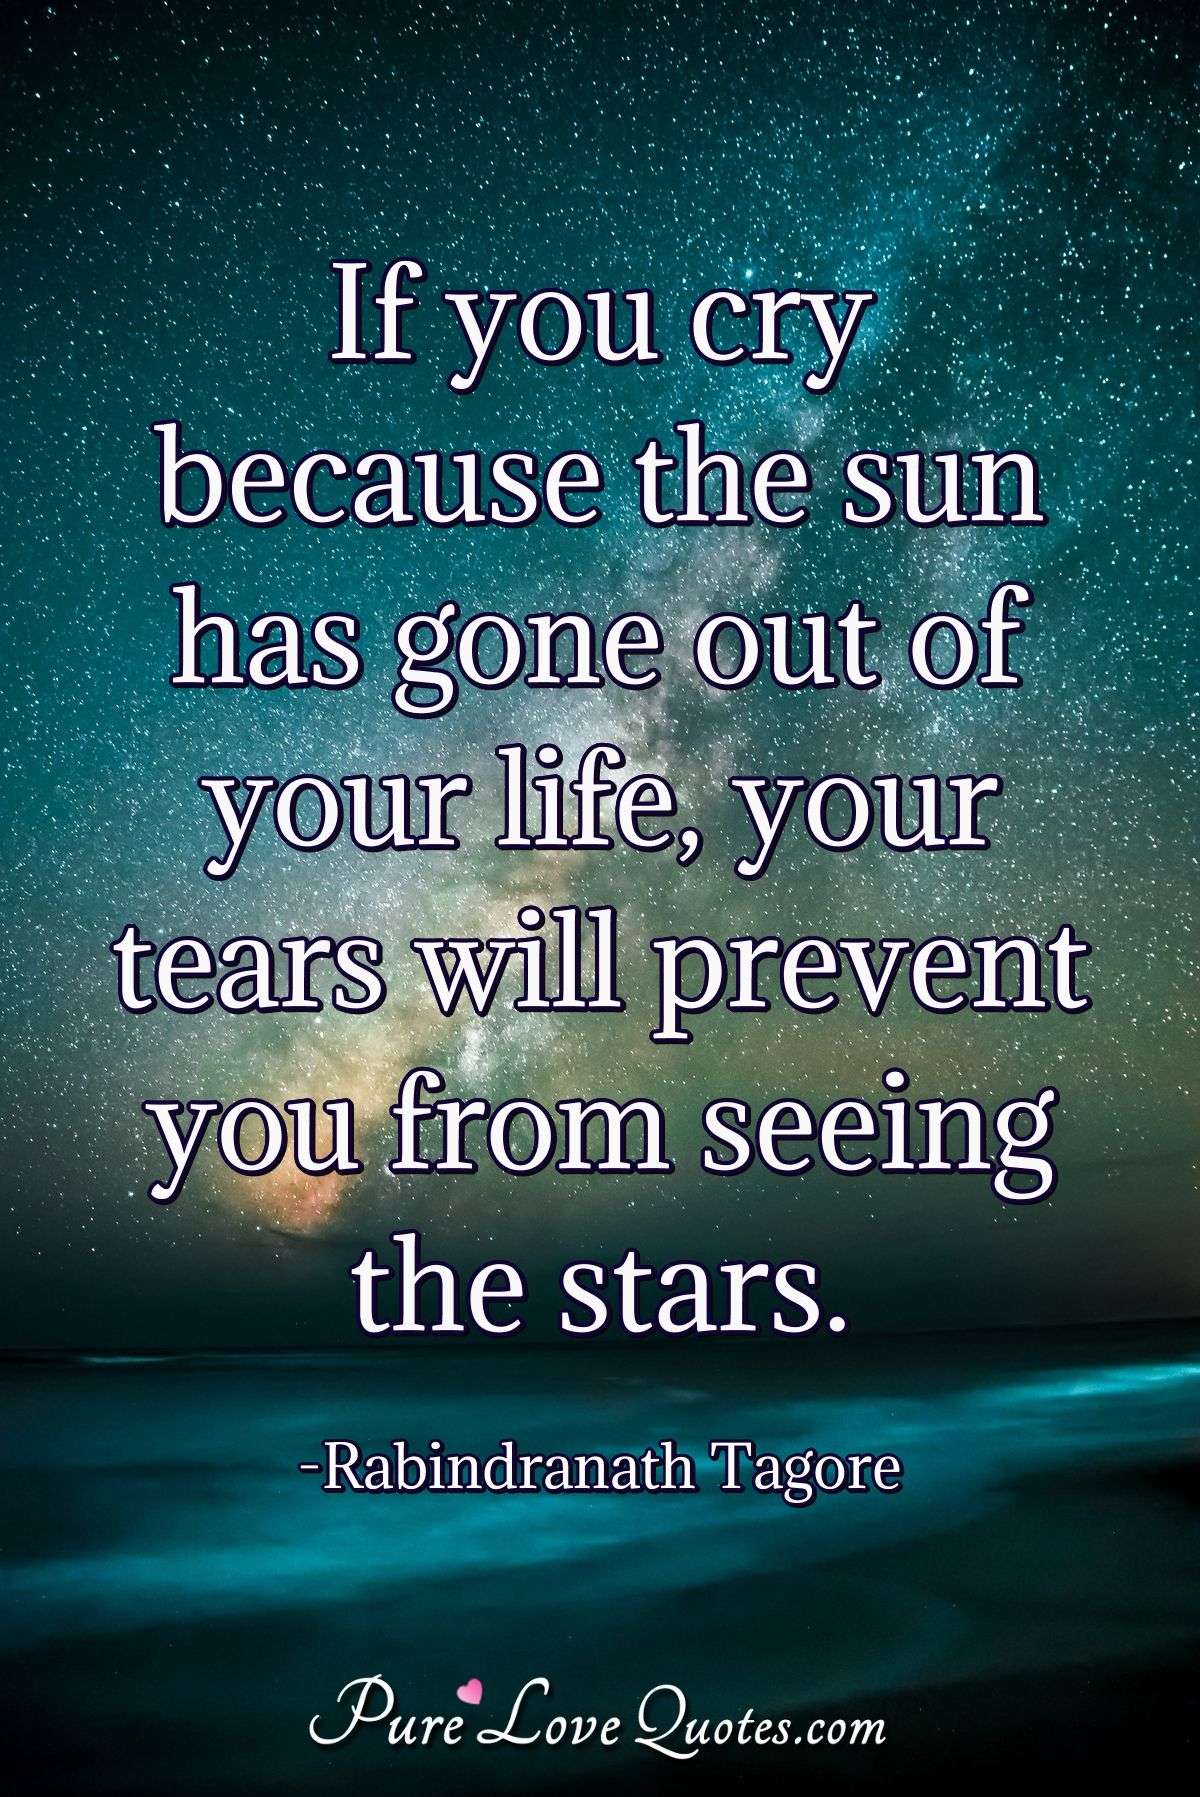 If you cry because the sun has gone out of your life, your tears will